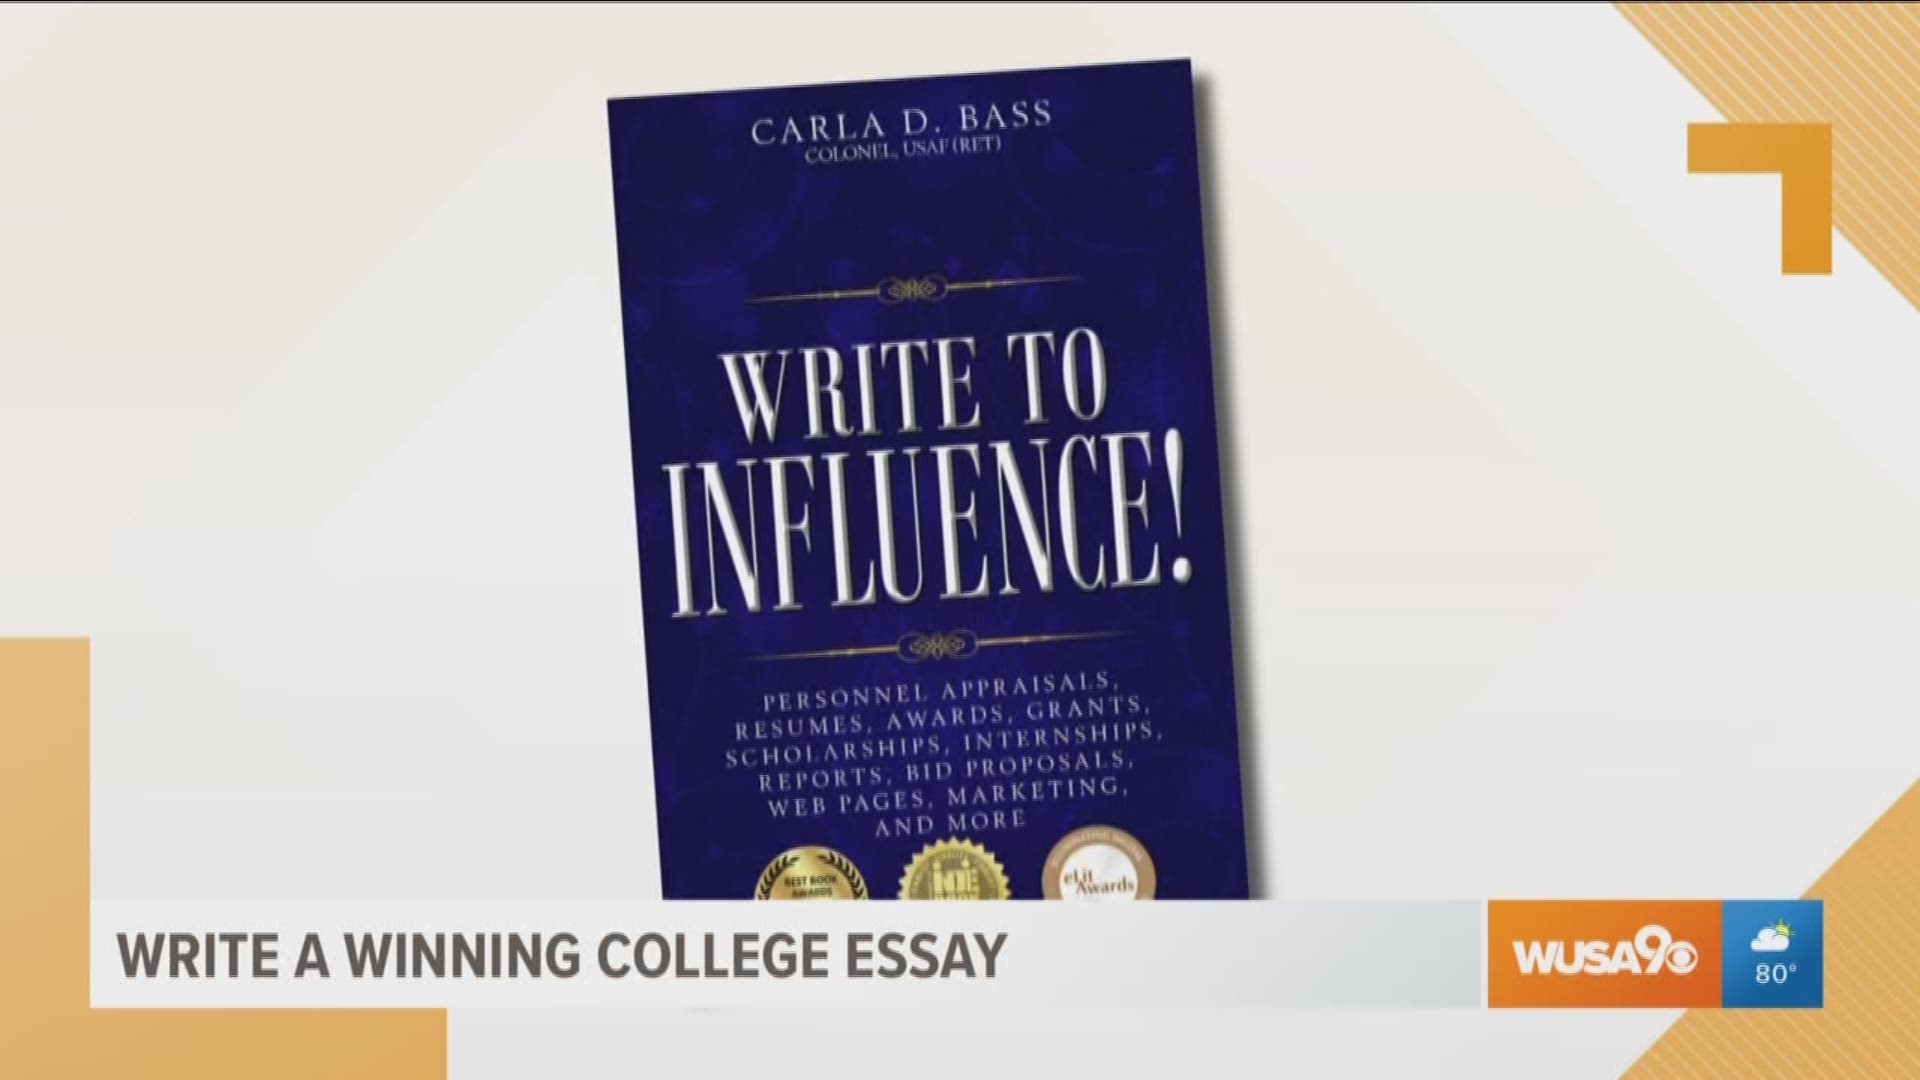 Carla Bass shares tips to write a killer college essay. She also shares how her workshops help students and career professionals. 